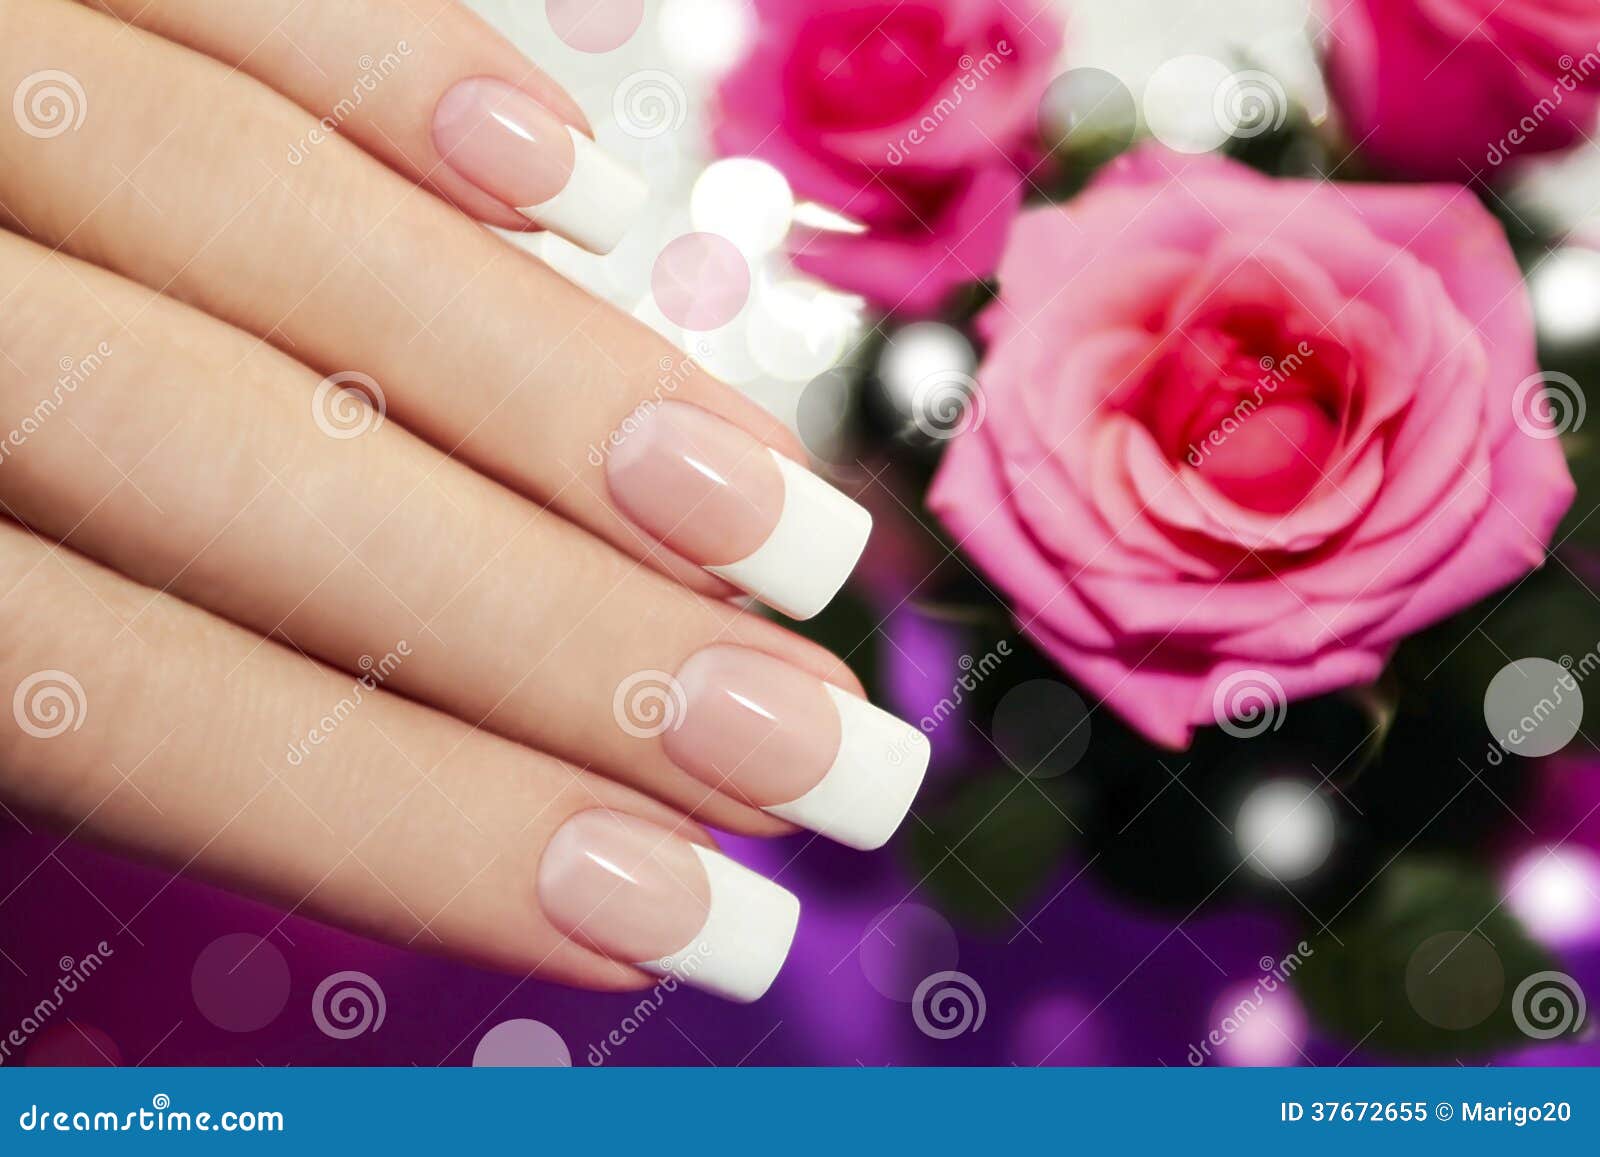 classic french manicure.